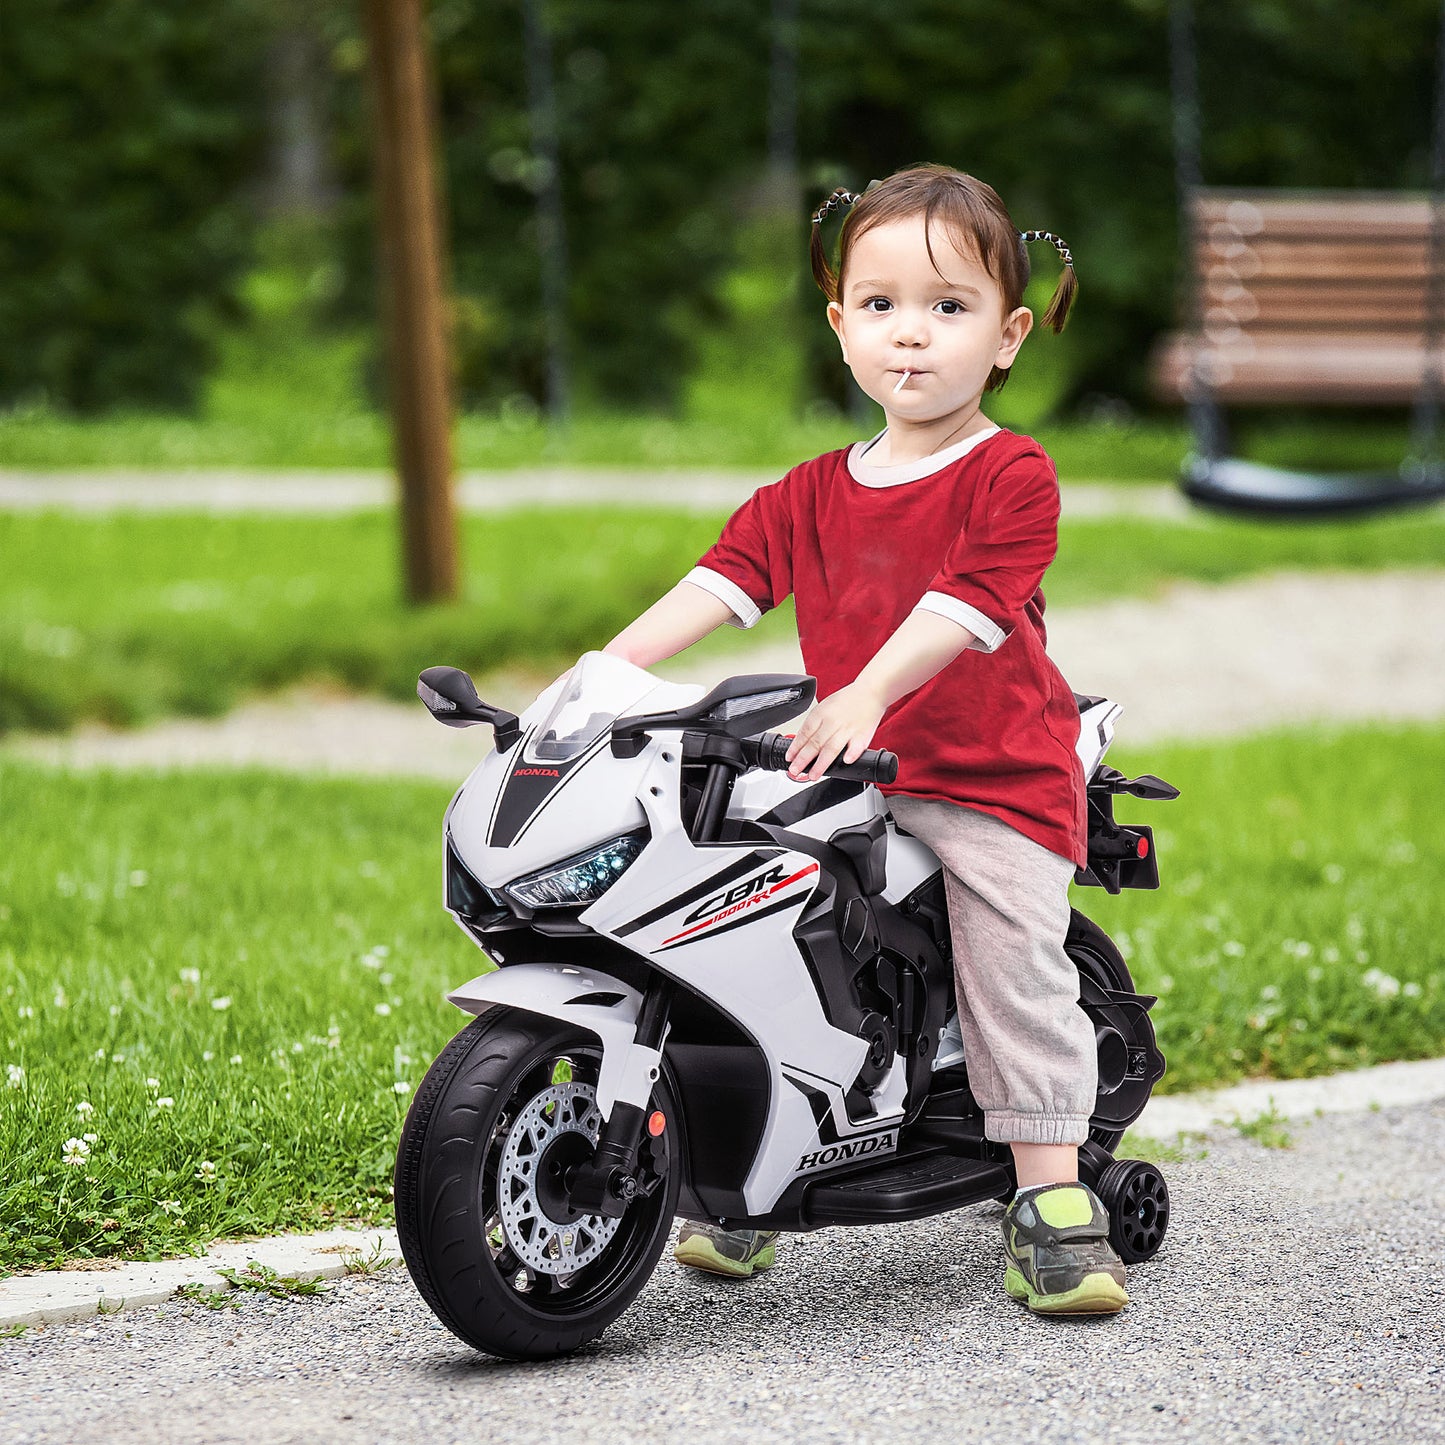 HOMCOM Electric Ride On Motorcycle with Headlights Music, 6V Battery Powered Kids Motorcycle Vehicle with Training Wheels, Outdoor Play Toy for 3-5 Years Old, White